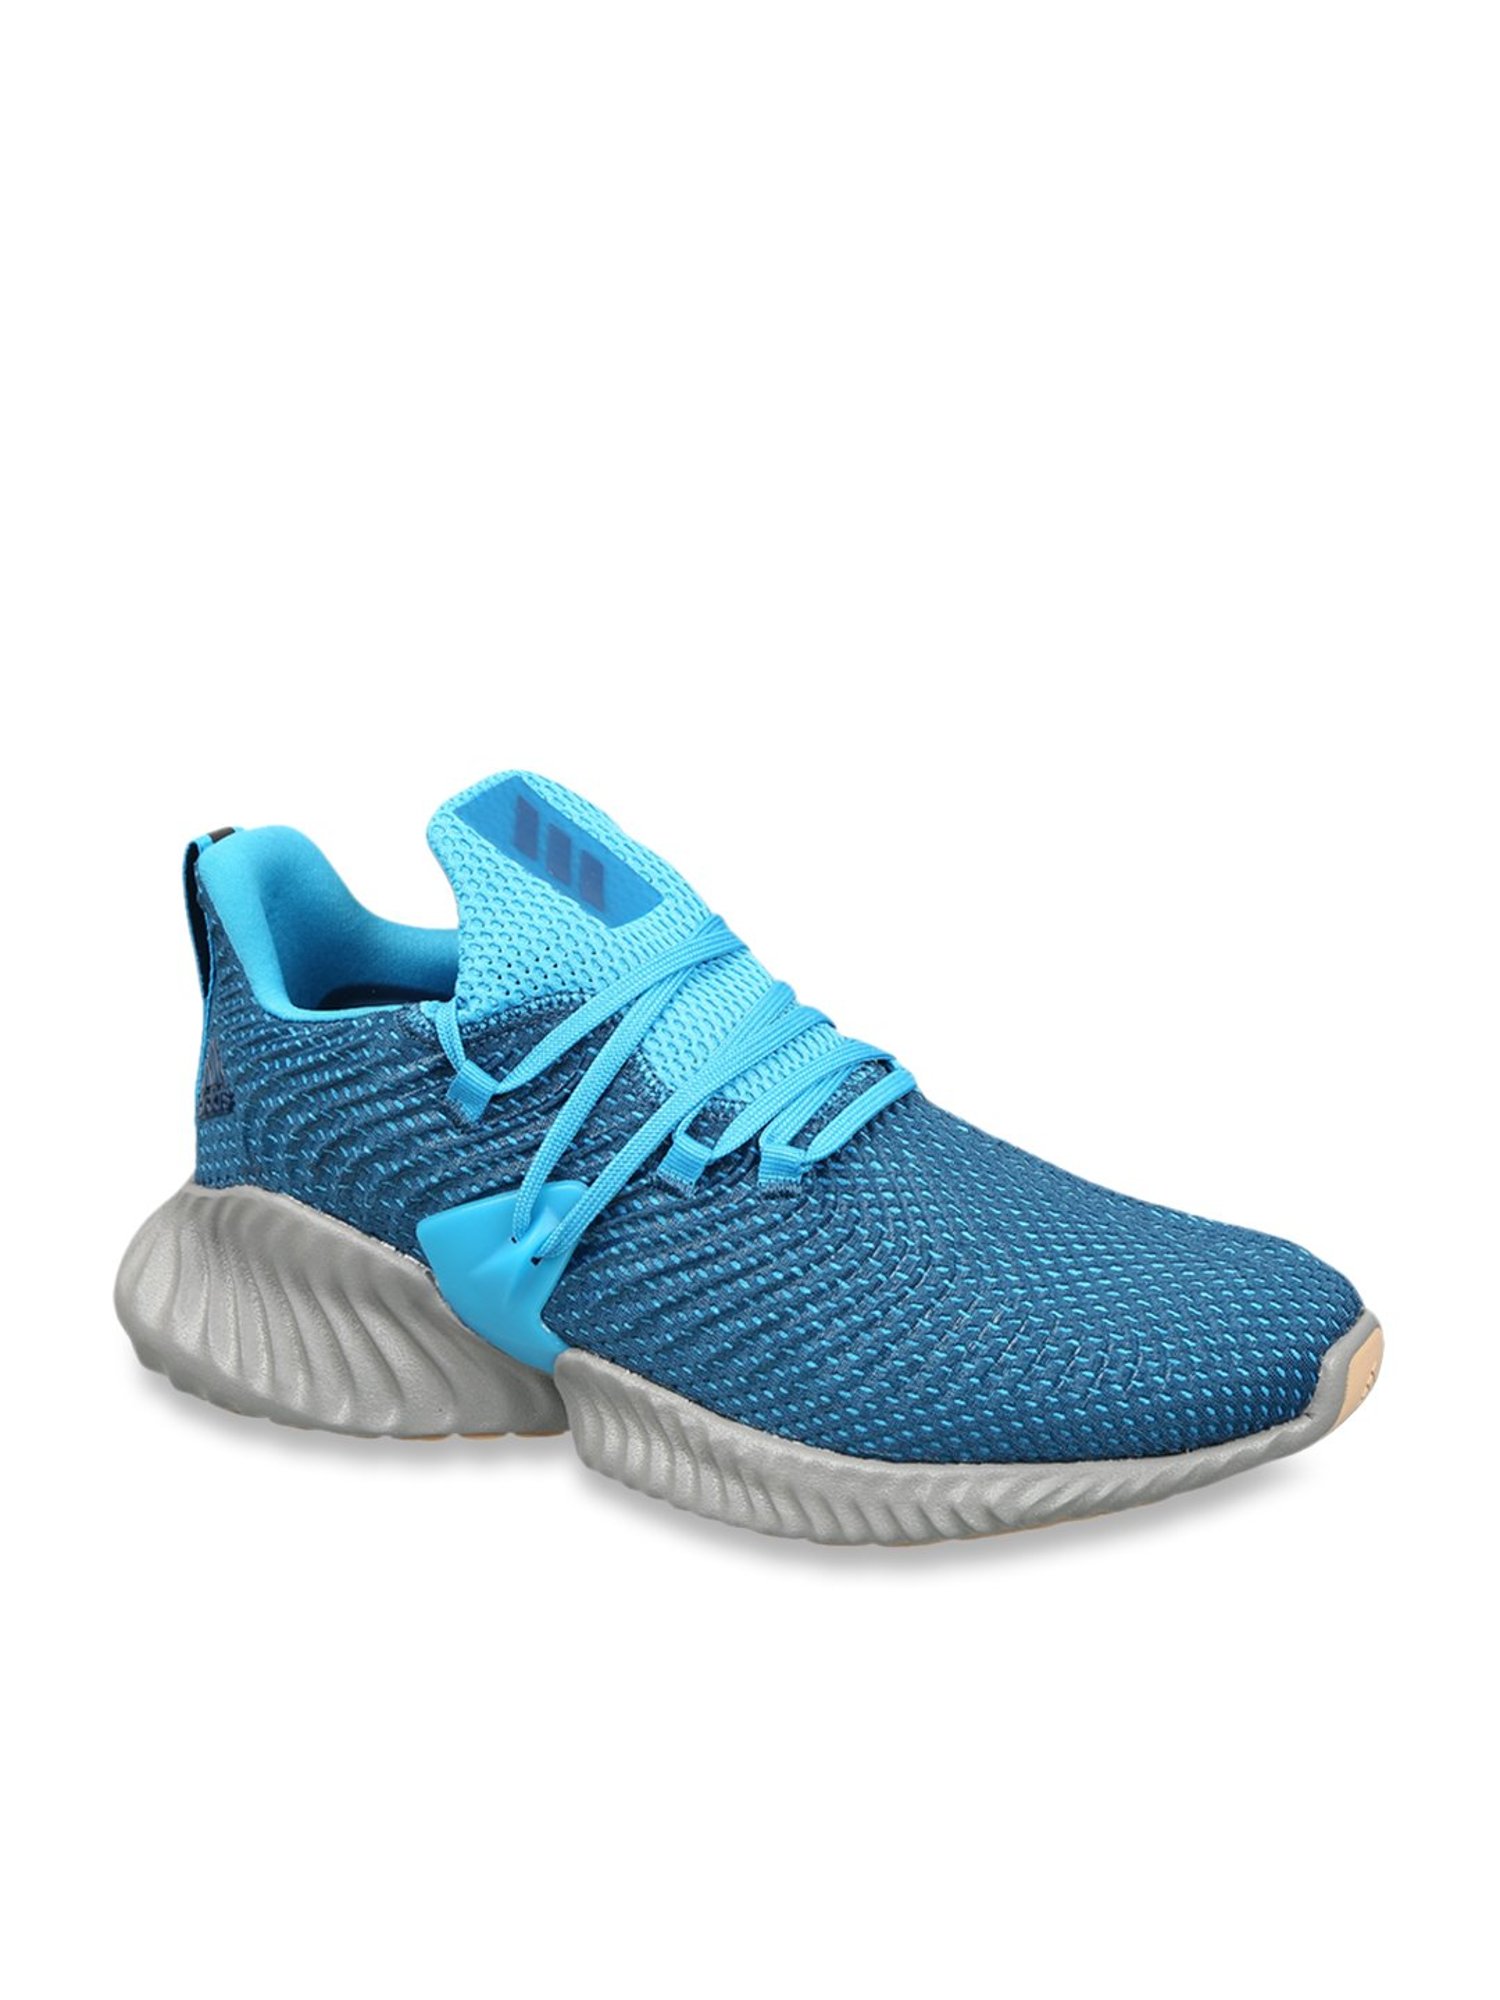 Een goede vriend aspect Ouderling Buy Adidas Alphabounce Instinct Blue Running Shoes for Men at Best Price @  Tata CLiQ